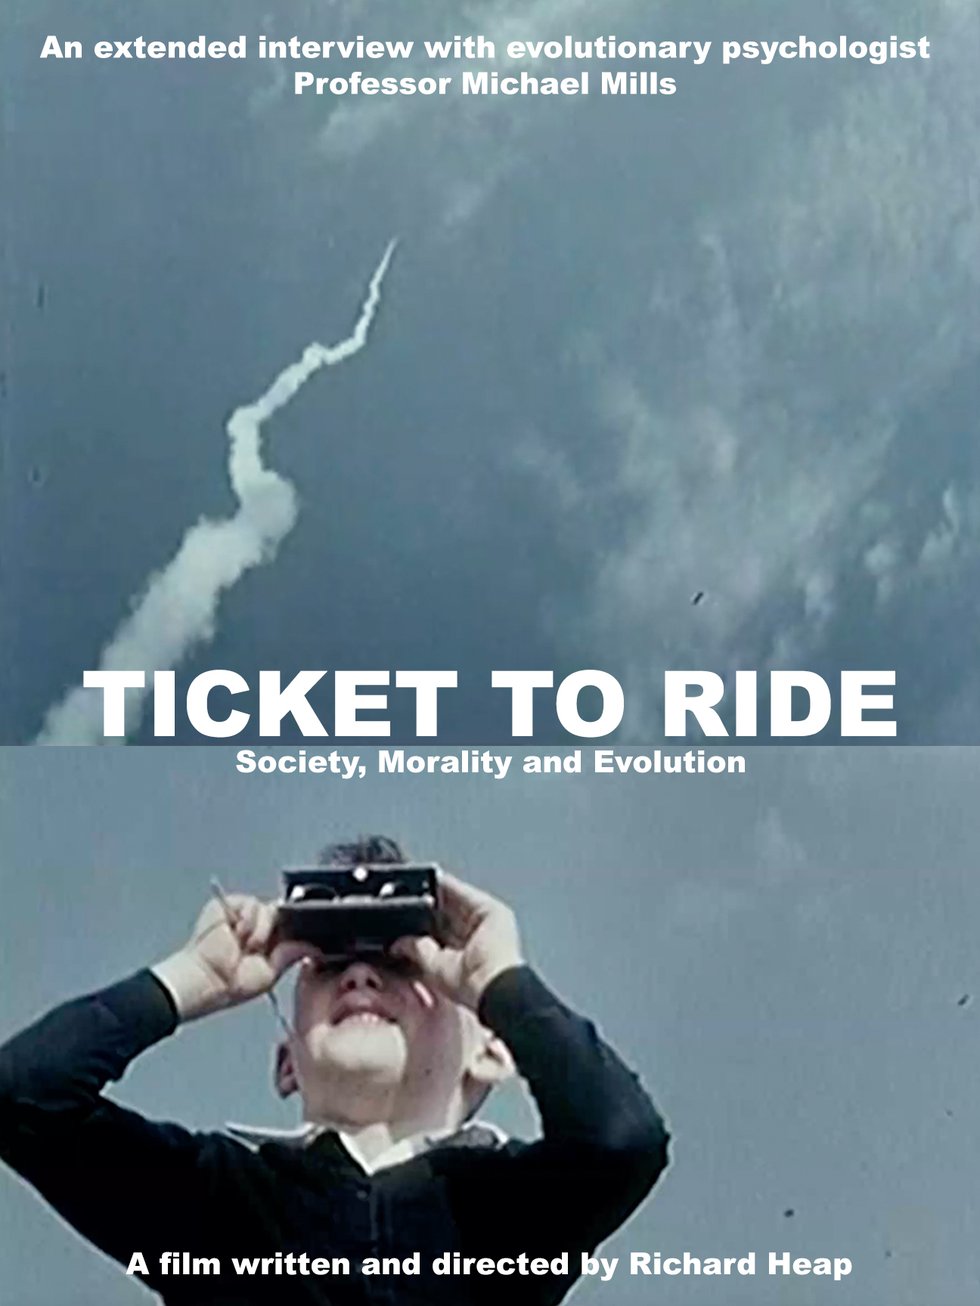 Ticket to Ride Science Documentary